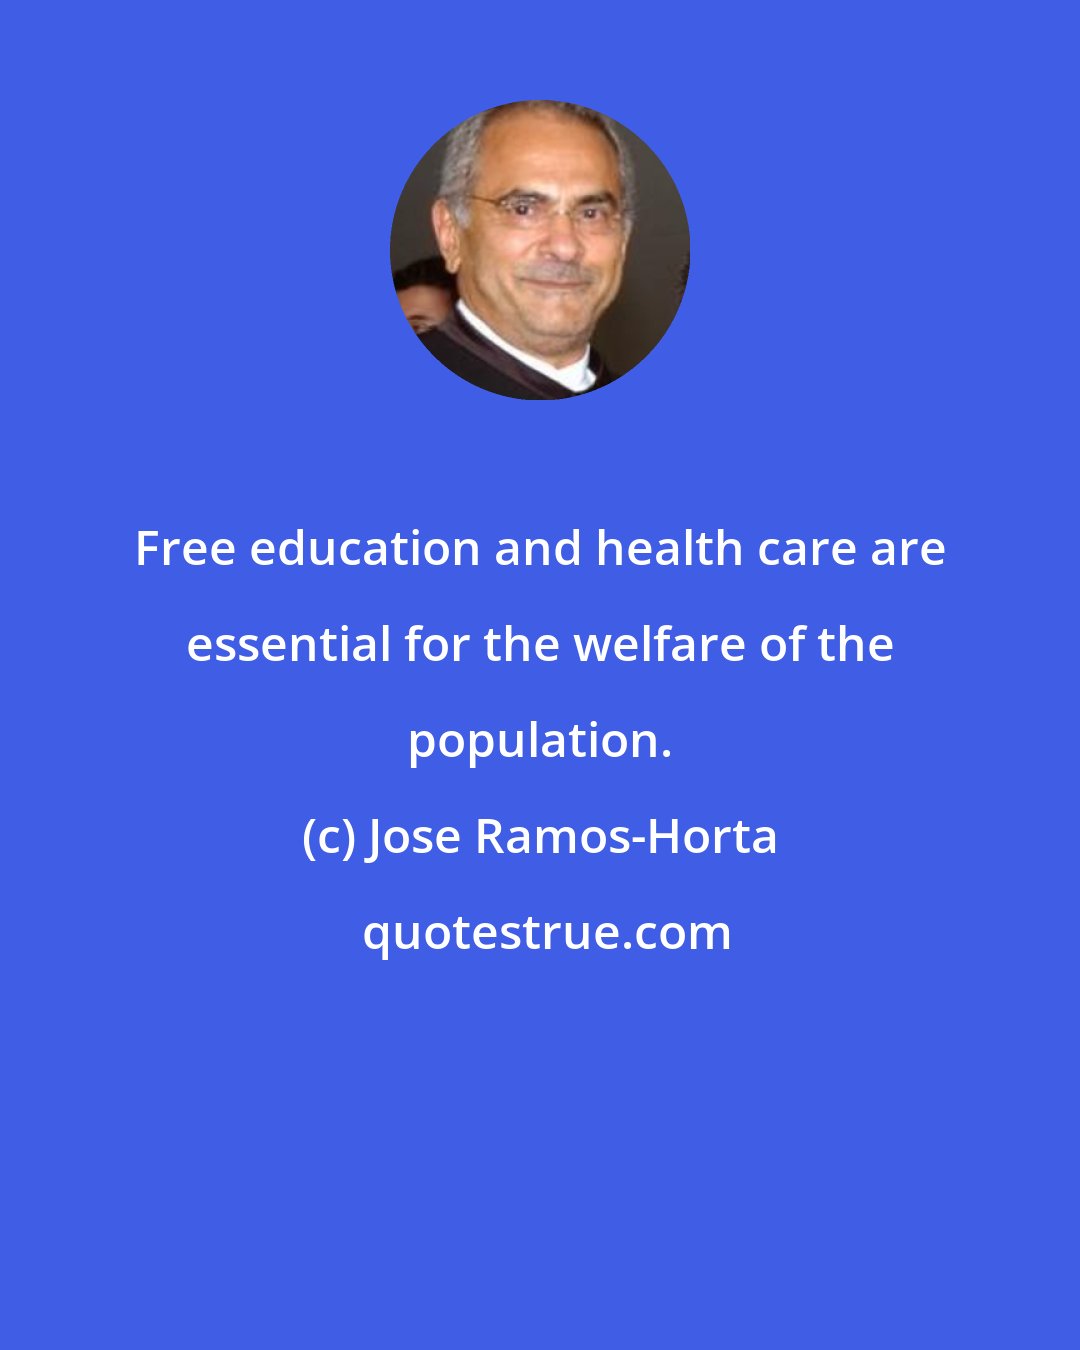 Jose Ramos-Horta: Free education and health care are essential for the welfare of the population.